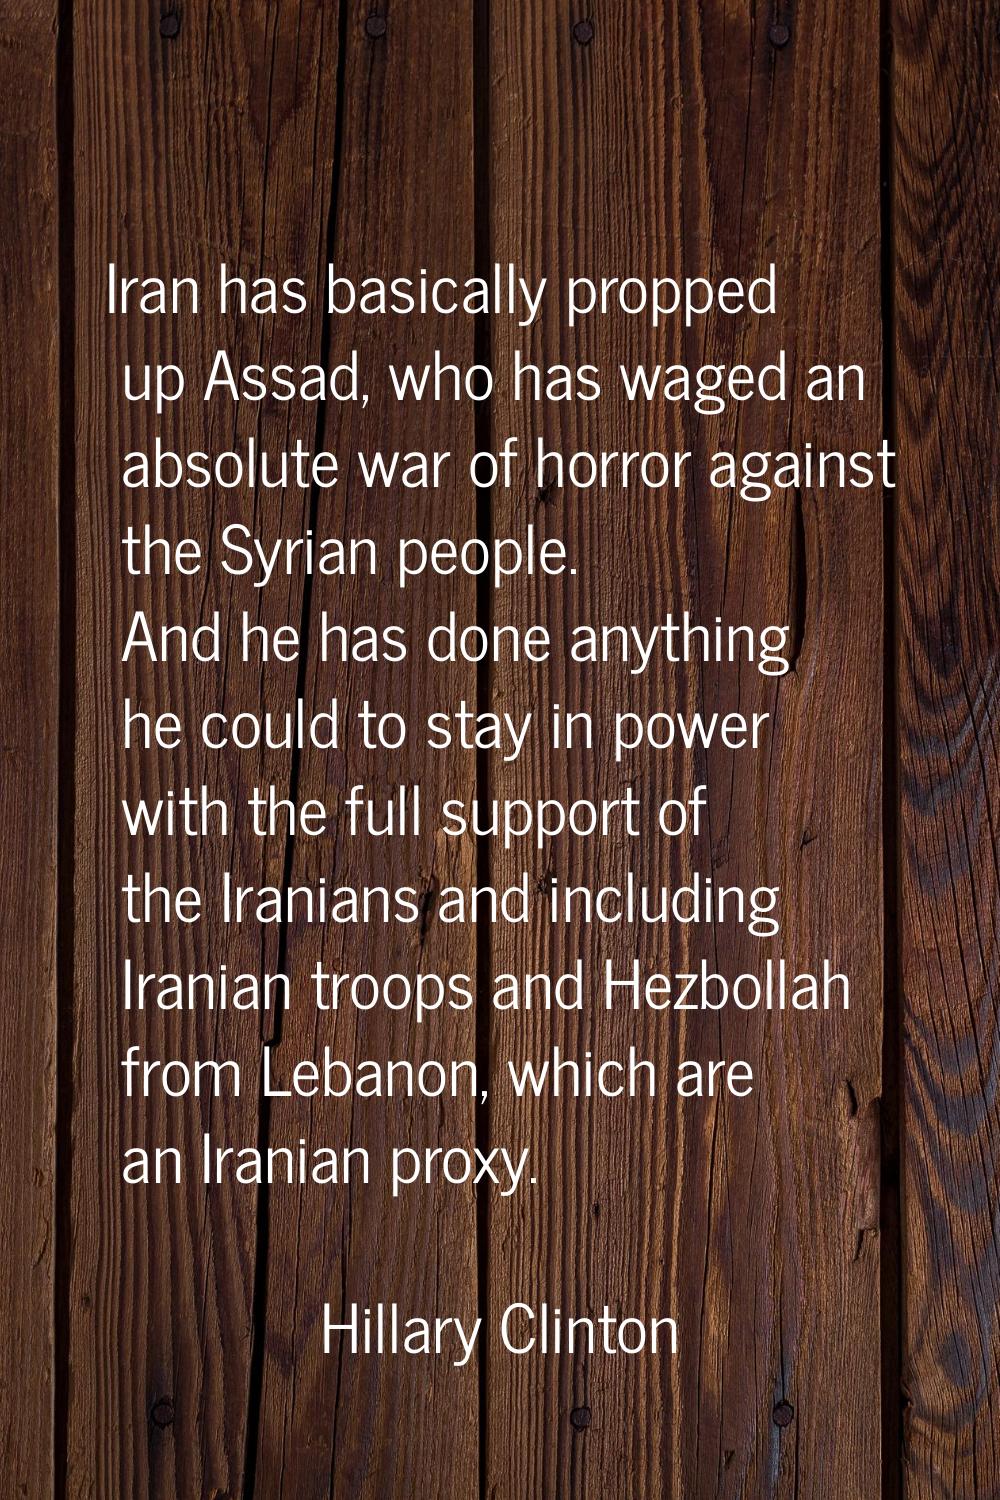 Iran has basically propped up Assad, who has waged an absolute war of horror against the Syrian peo